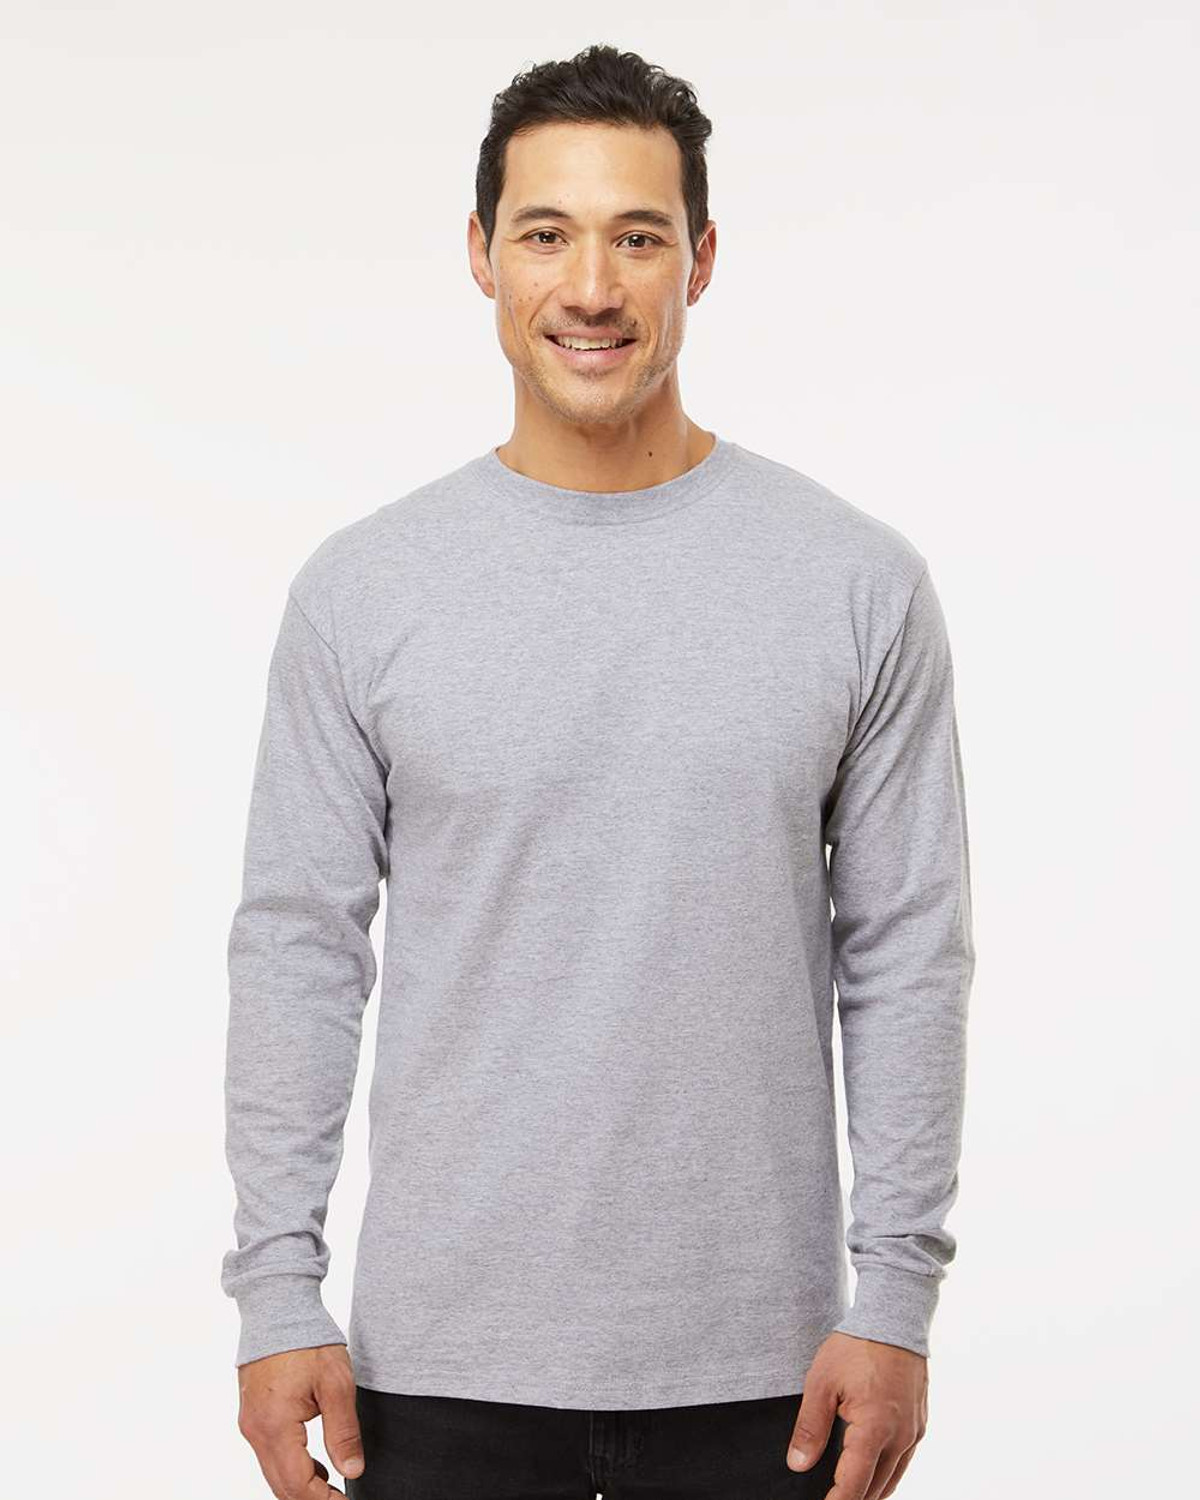 M&O 4820 Gold Soft Touch Long Sleeve T-shirt